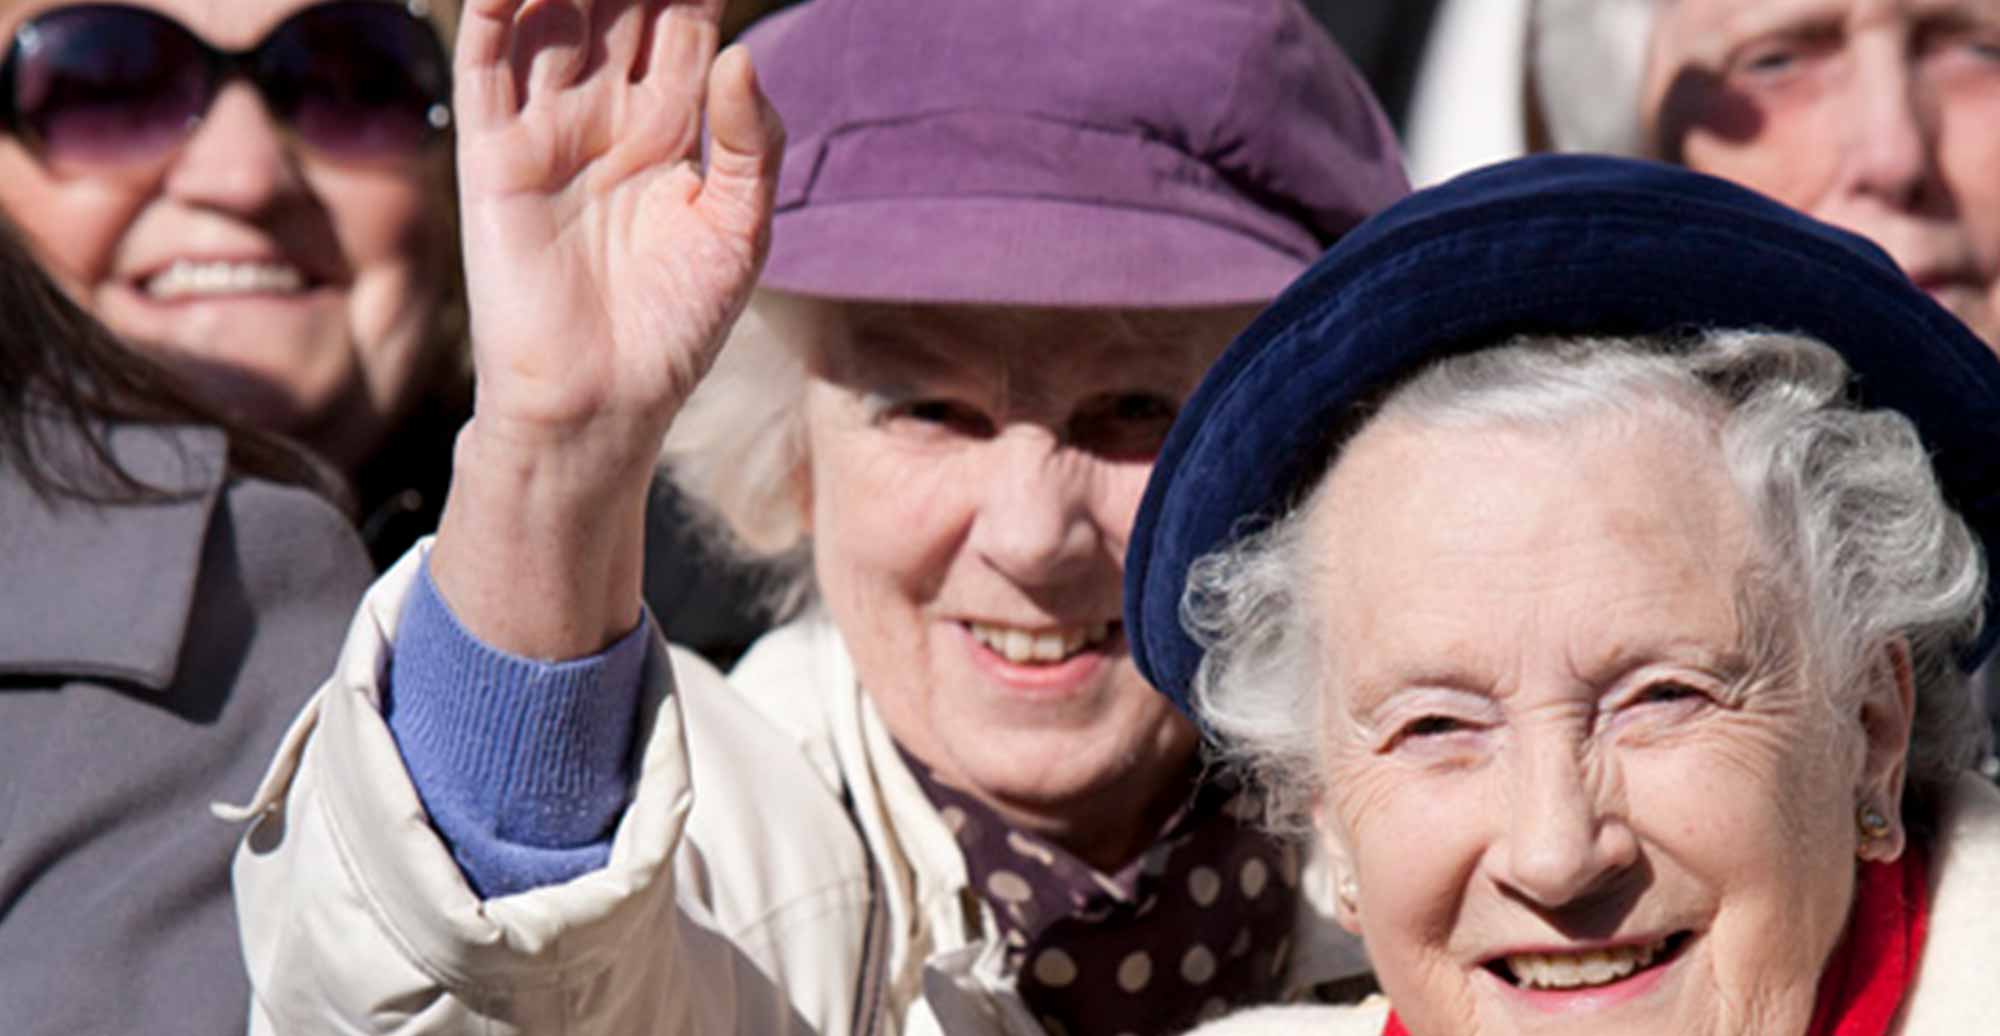 A crowd of people smiling but the focus is on a lady in a purple hat who waves to the camera.